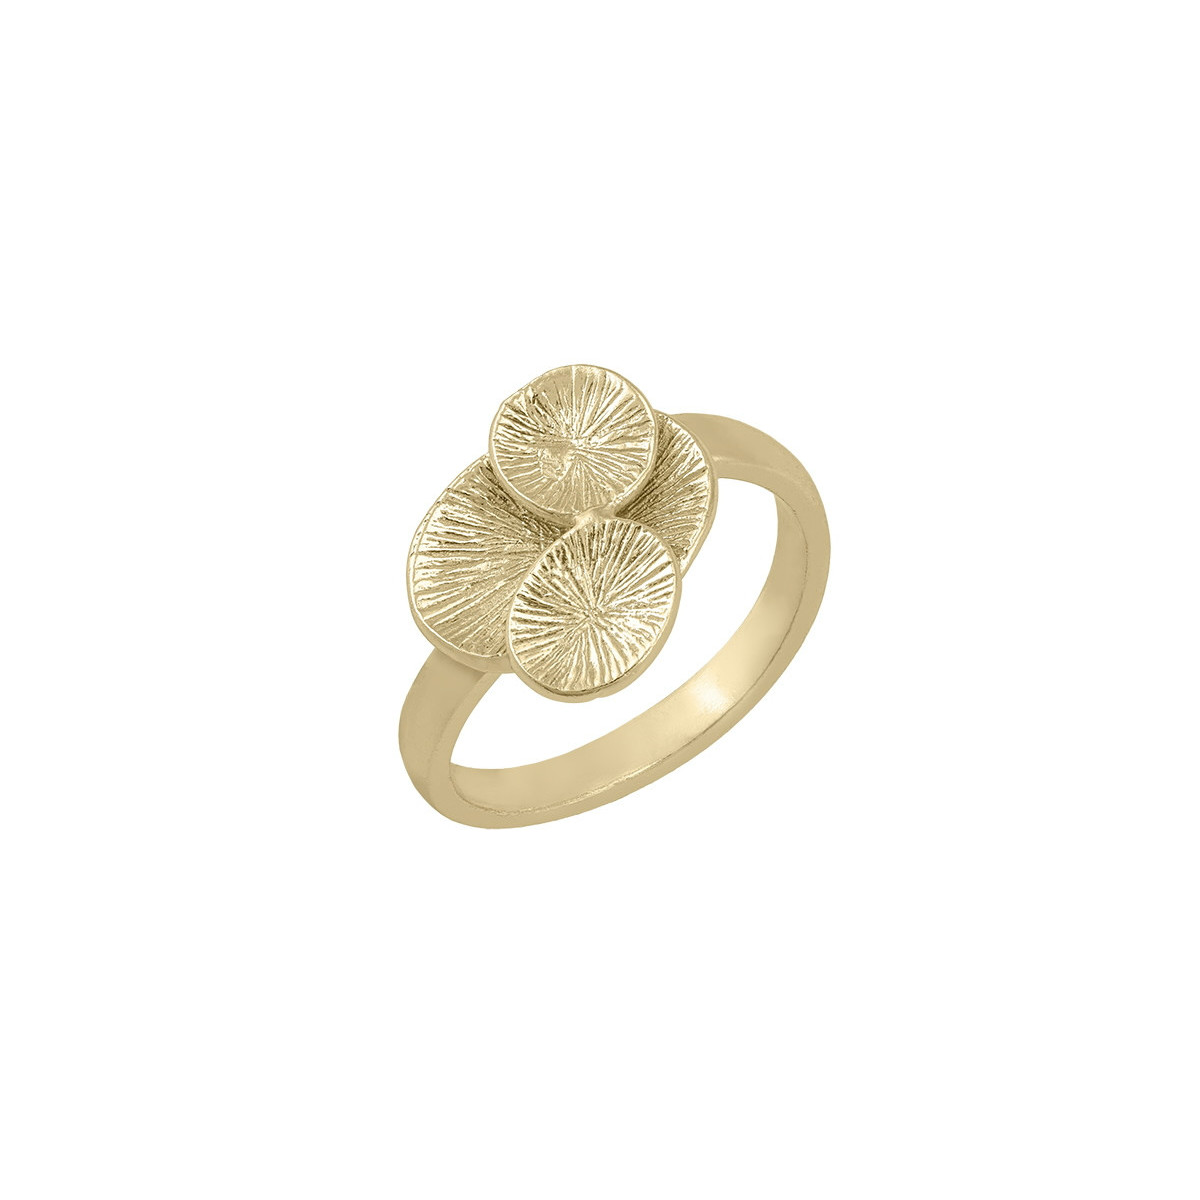 LILY Ring in Silver. 18k Gold Vermeil